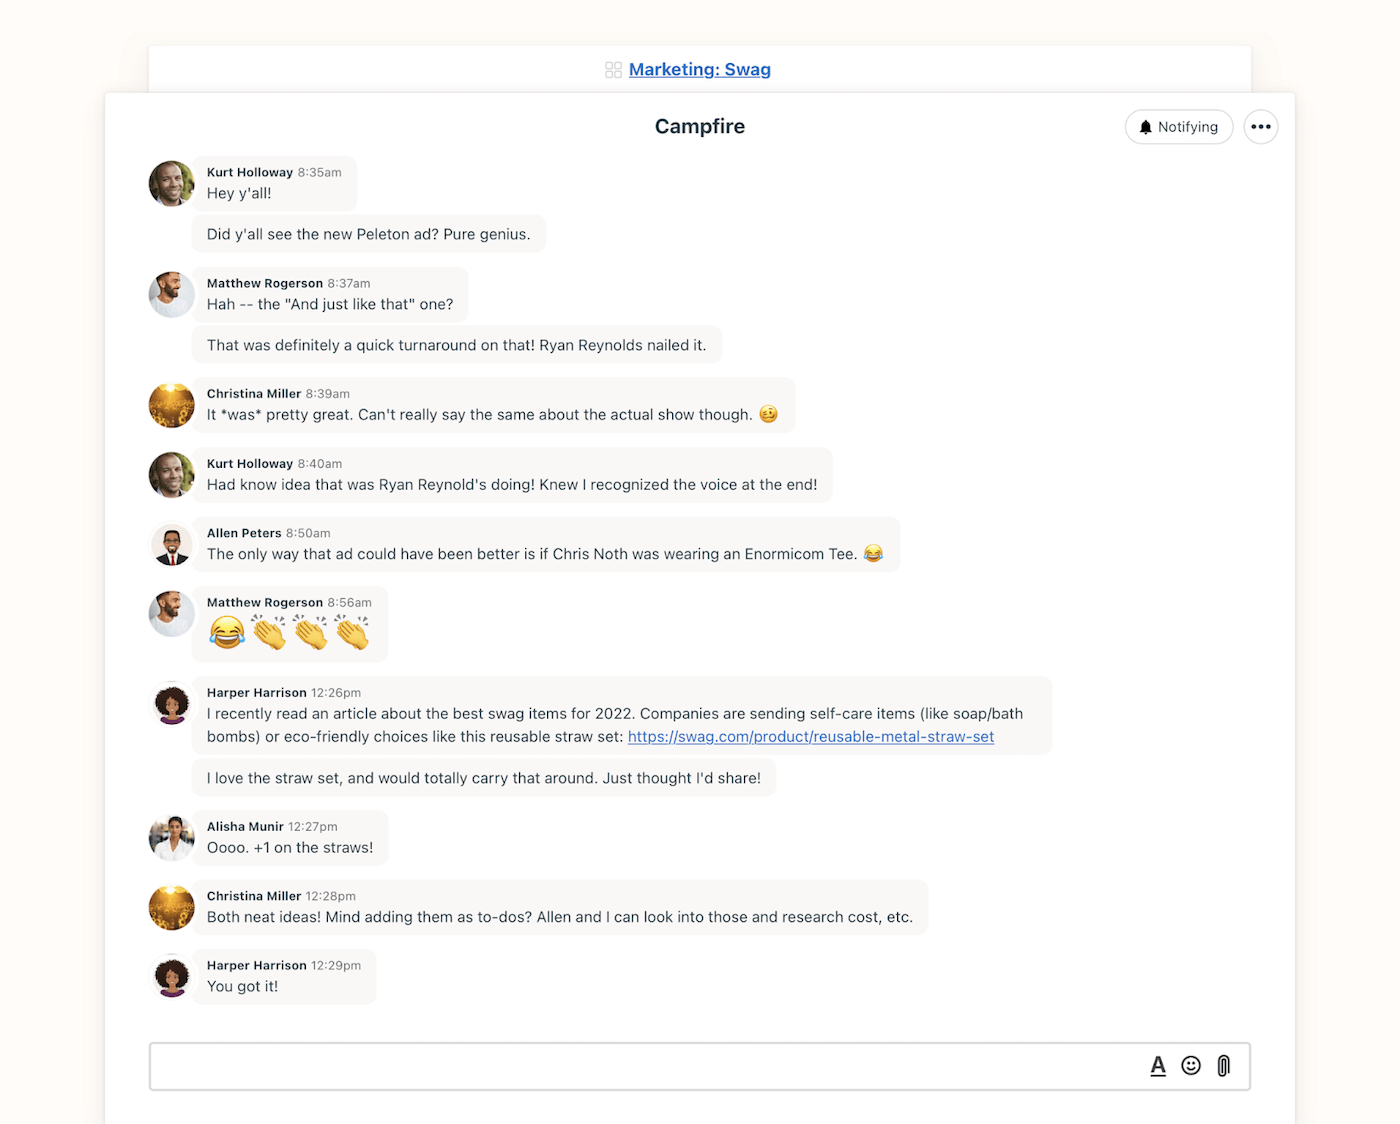 Basecamp’s Campfire feature allows group conversations to take place organically.